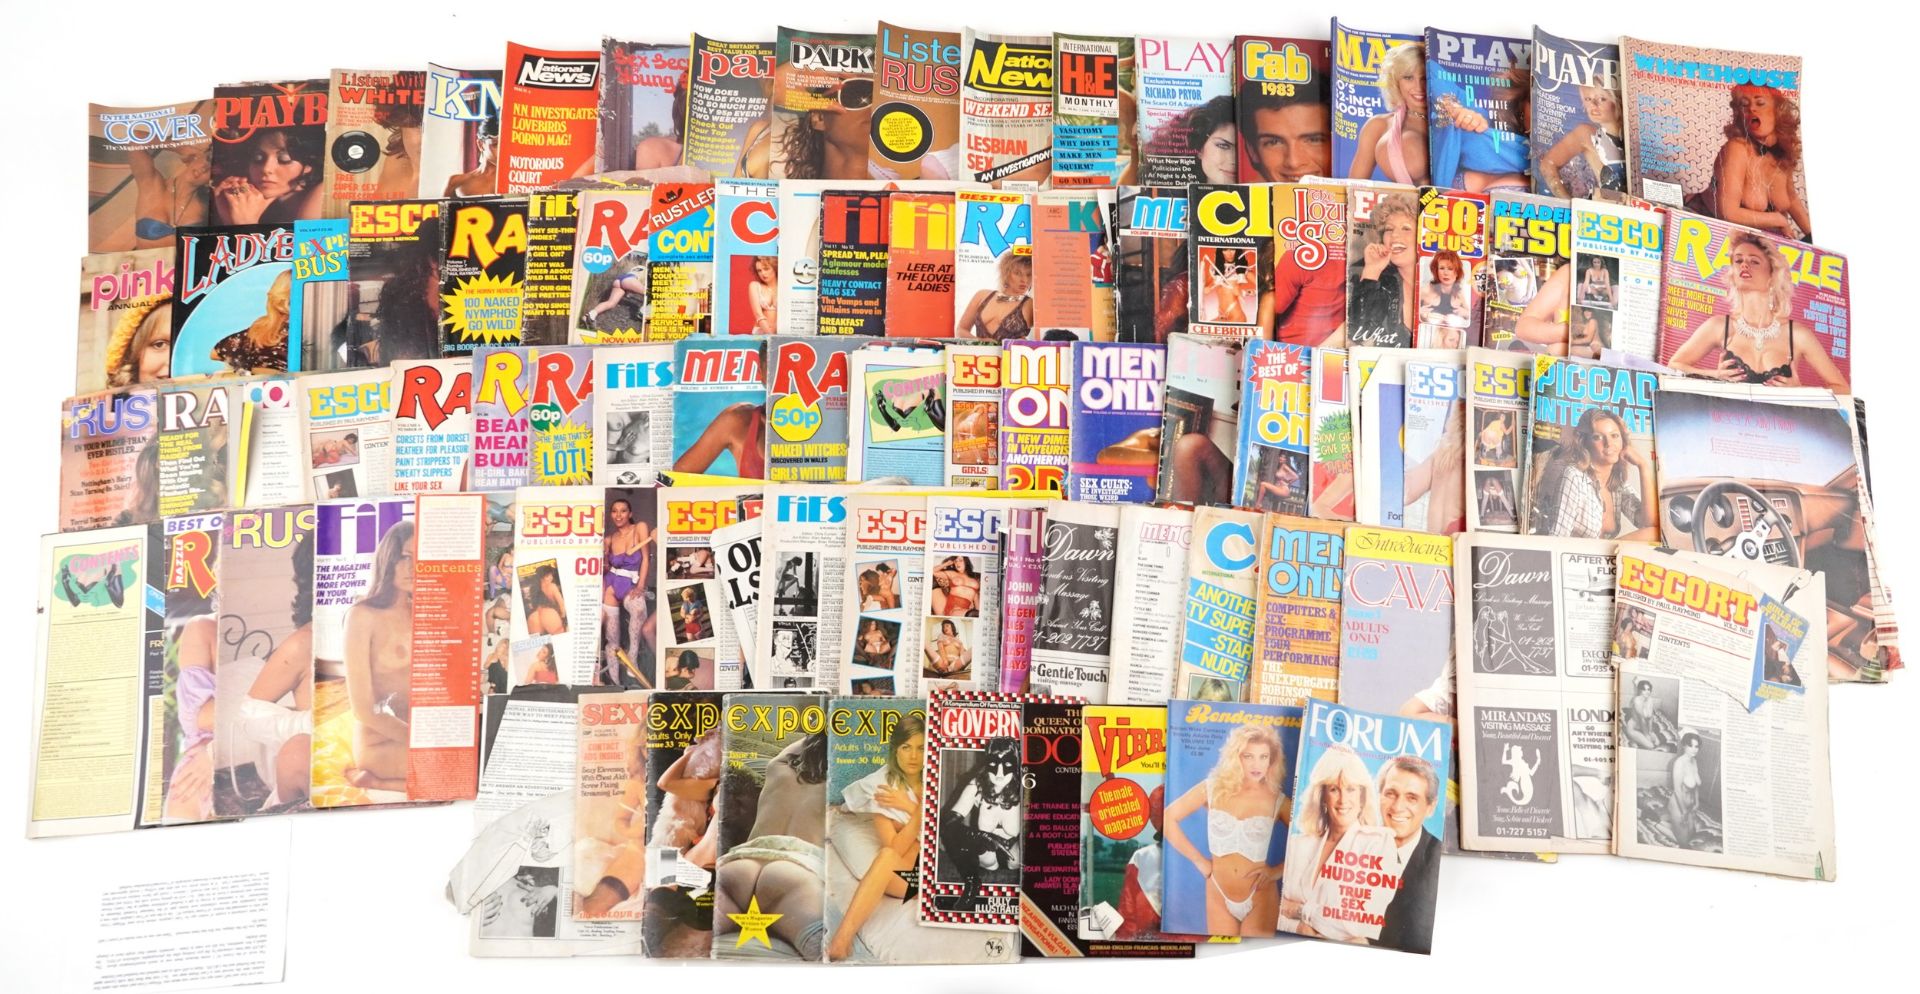 Large collection of erotic magazines including Mayfair, Playboy, Playgirl and International H & E